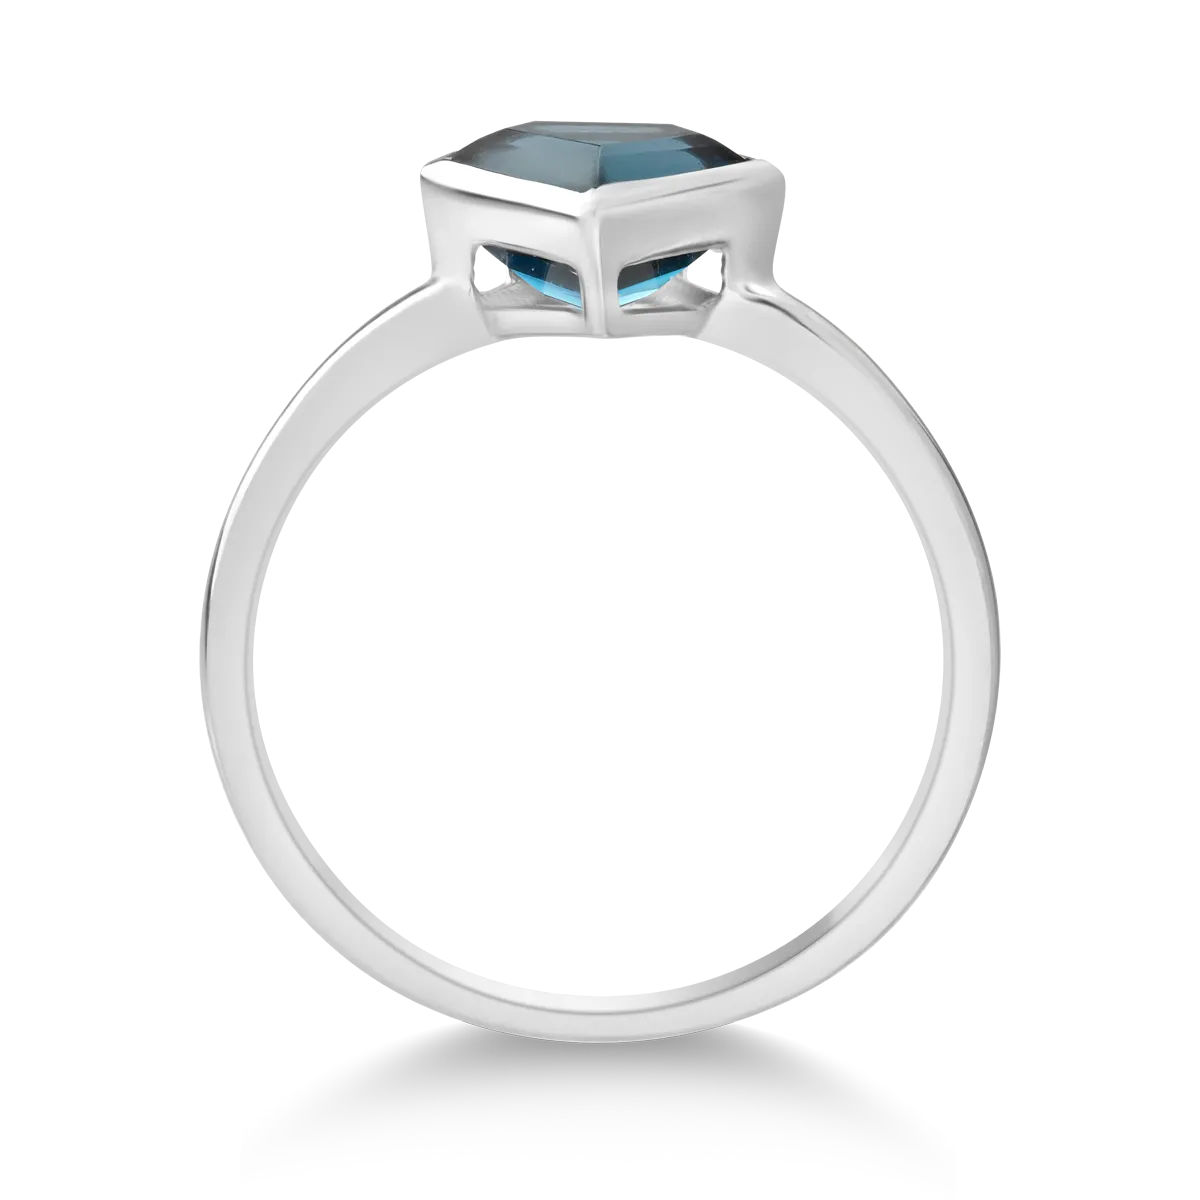 18K white gold ring with 1.56ct london blue topaz